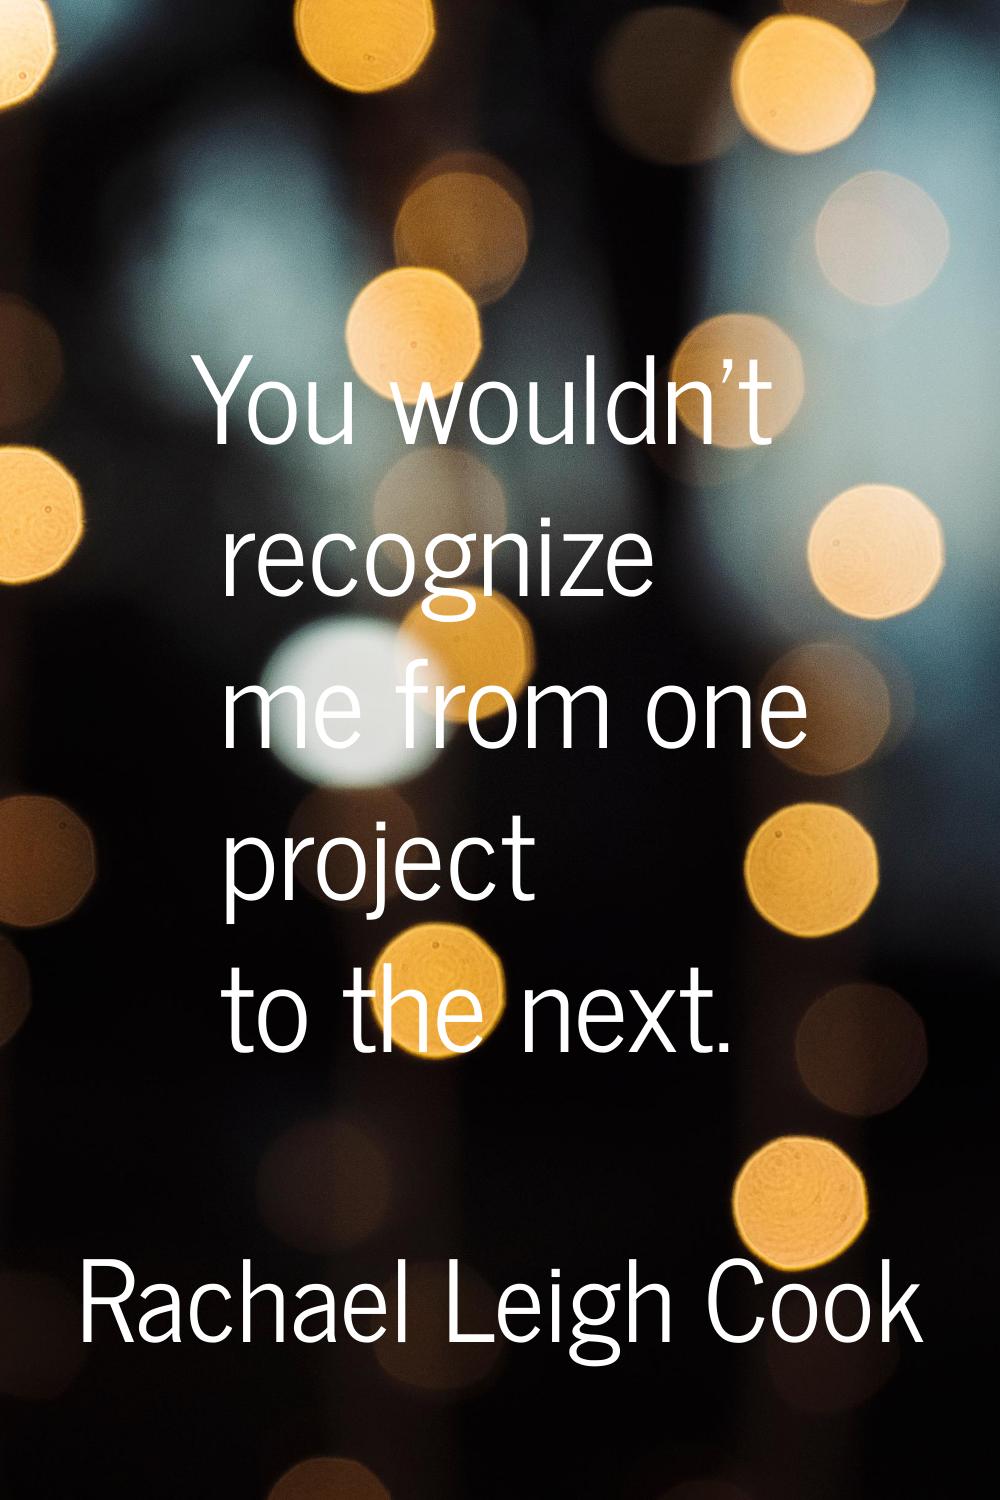 You wouldn't recognize me from one project to the next.